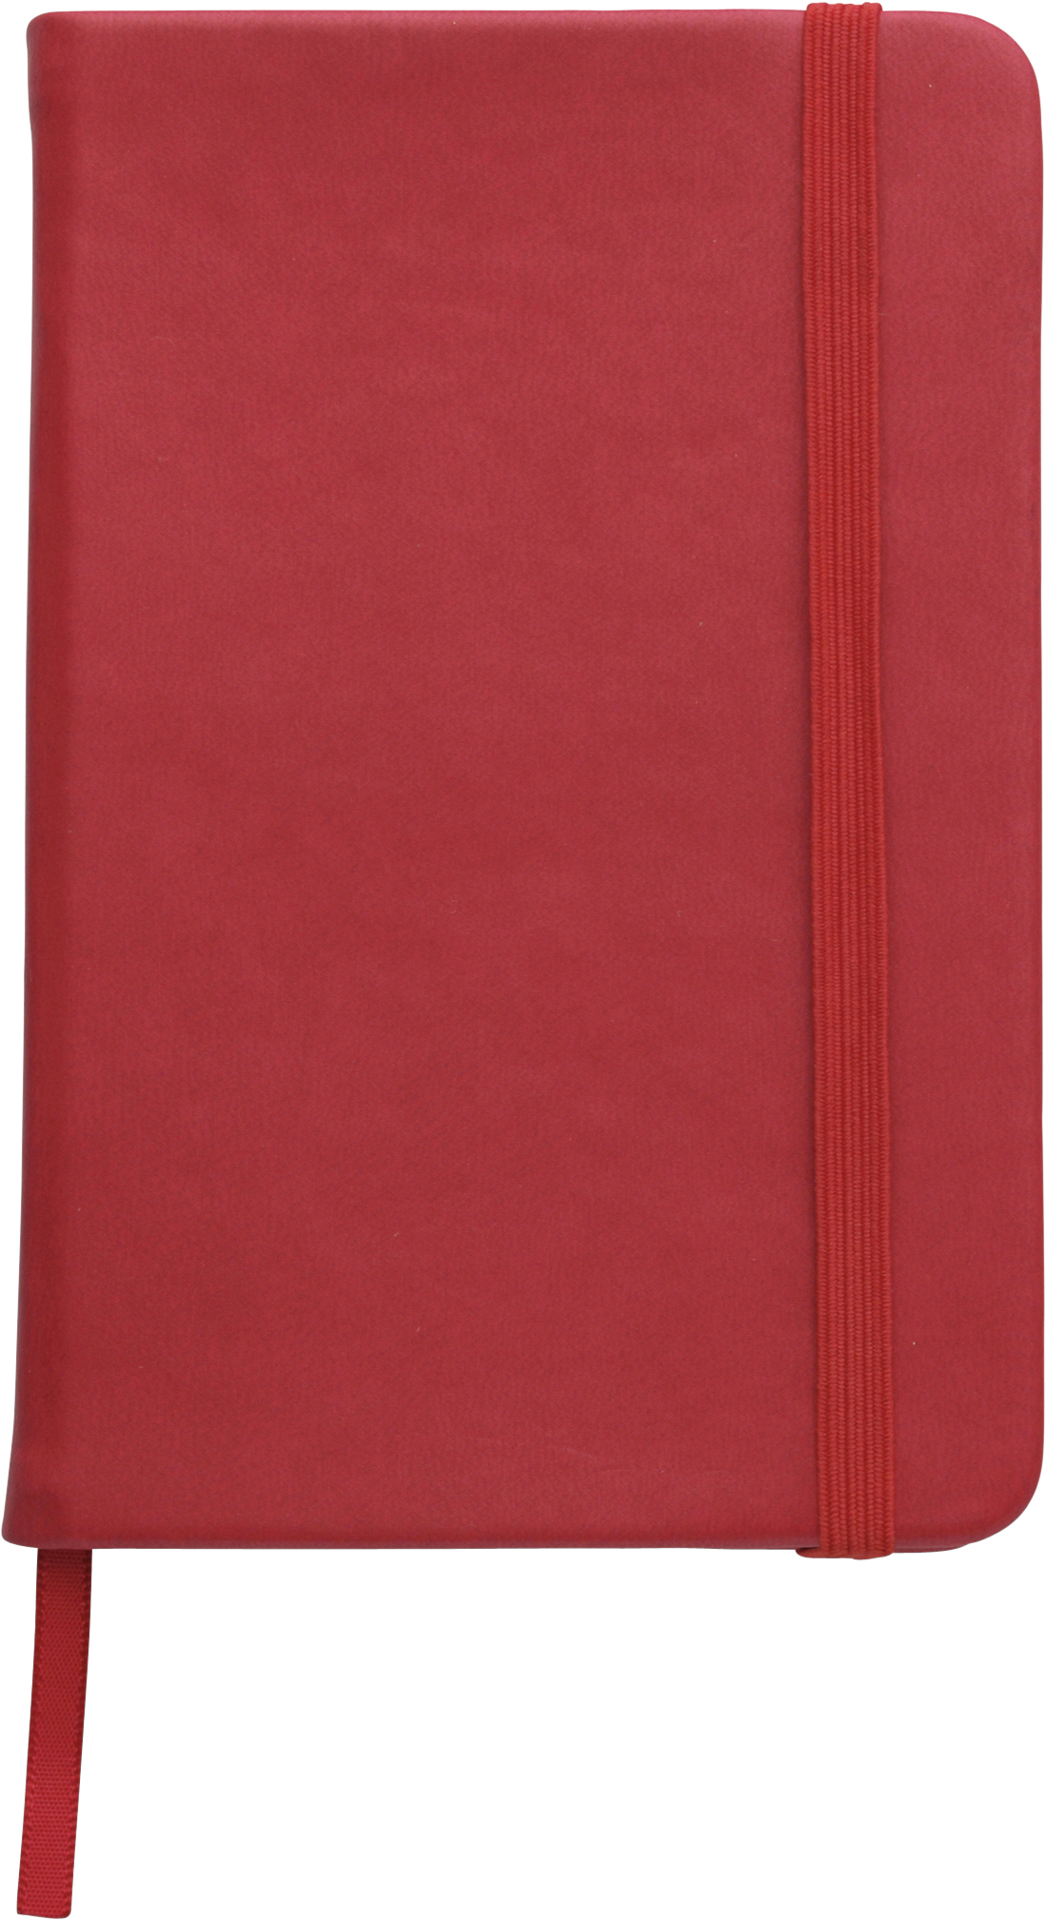 A6 Notebook with soft PU cover in red